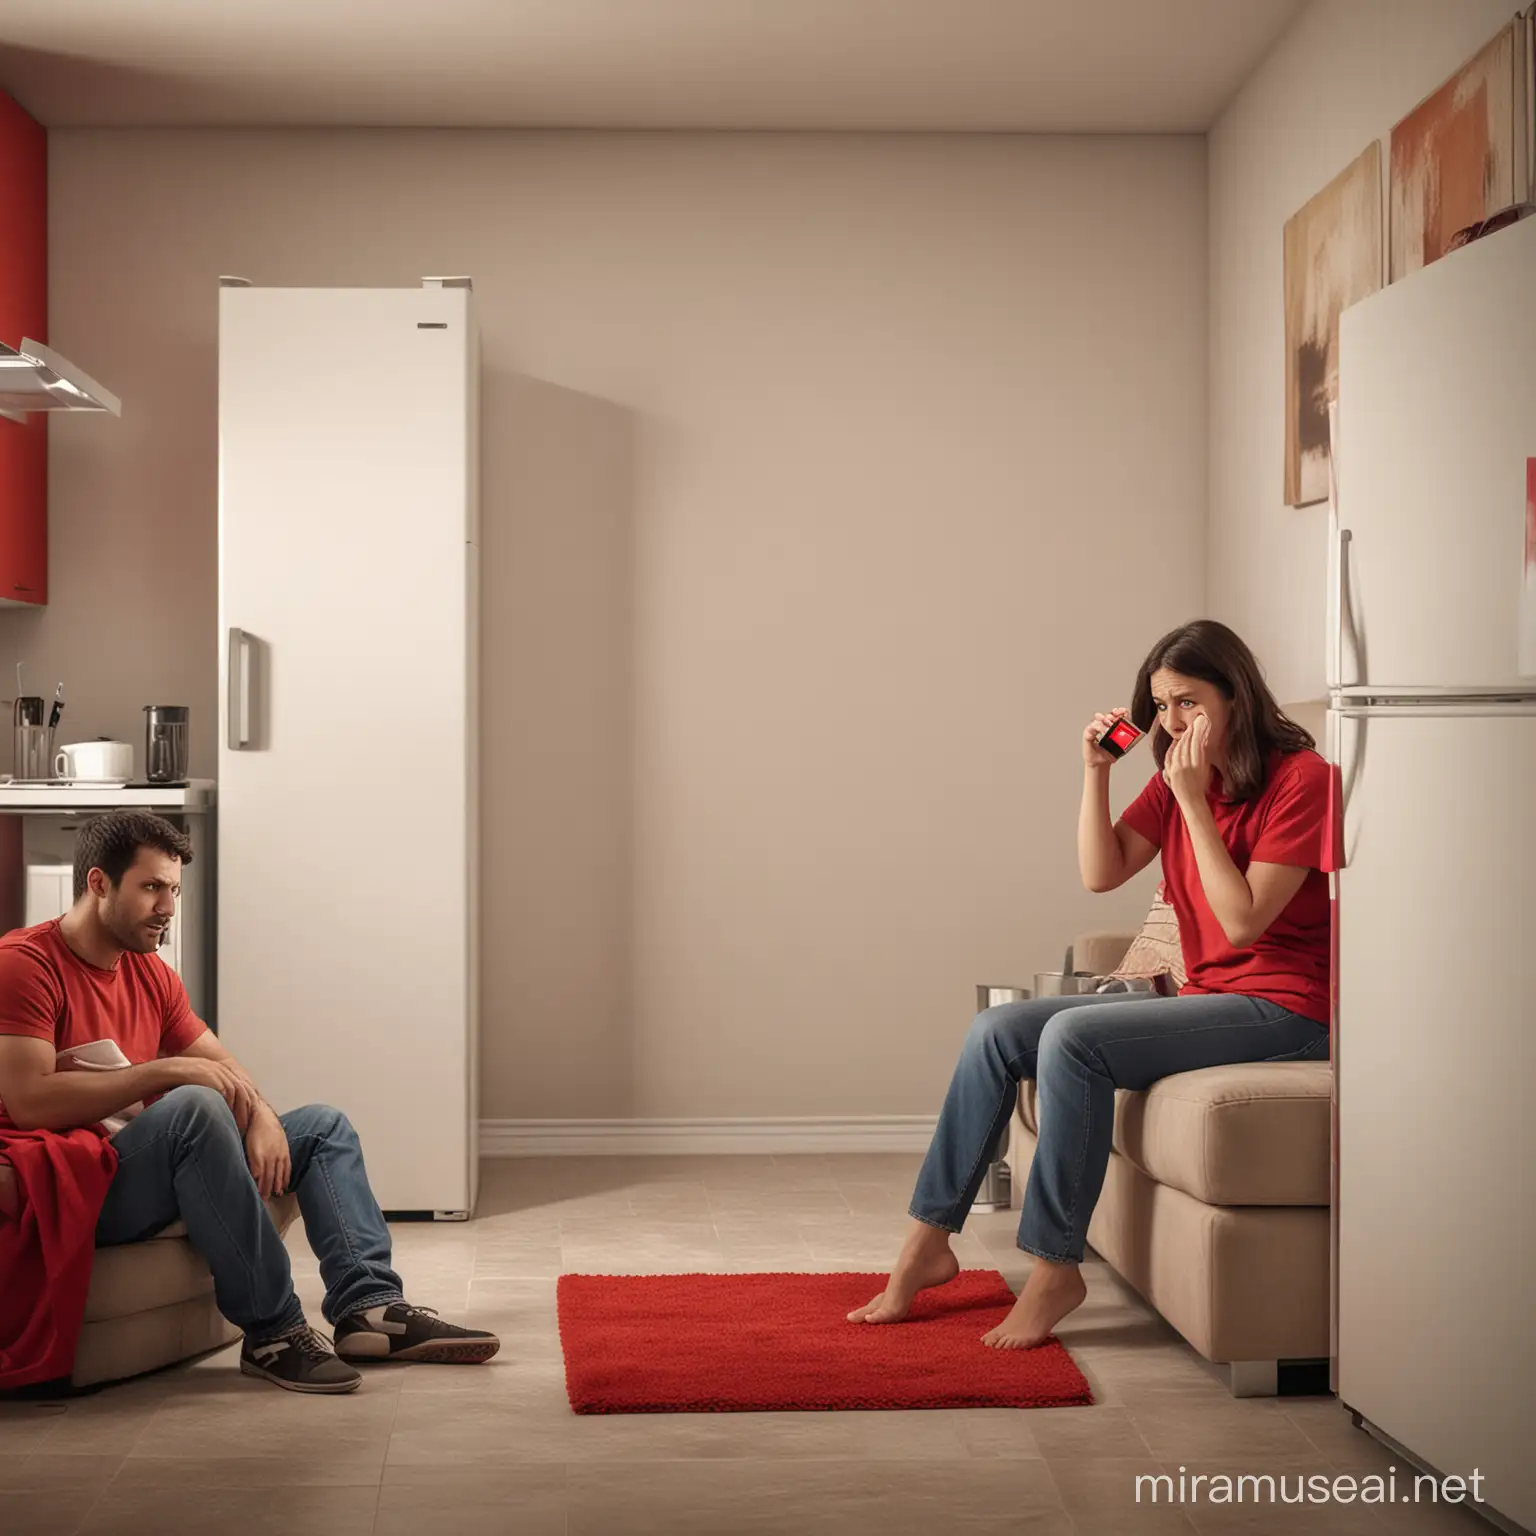 Domestic Scene Woman on Sofa with RedScreened Cellphone and Angry Man at Refrigerator